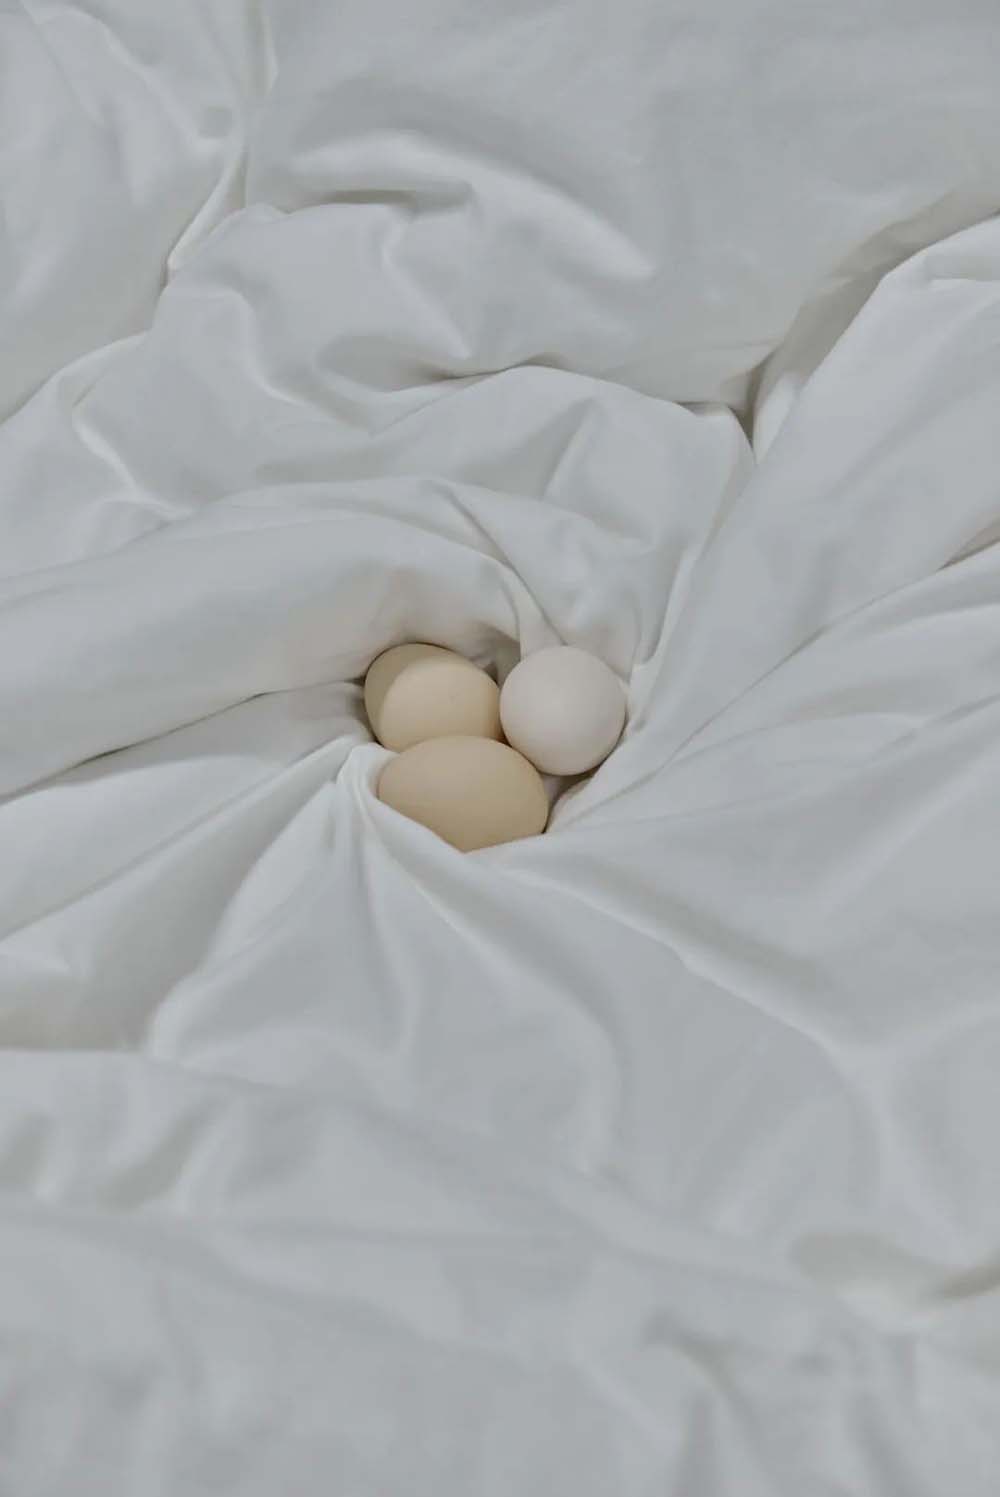 ‘Eggs in a Warm Bed’ by Chen Yu. Courtesy of Meng